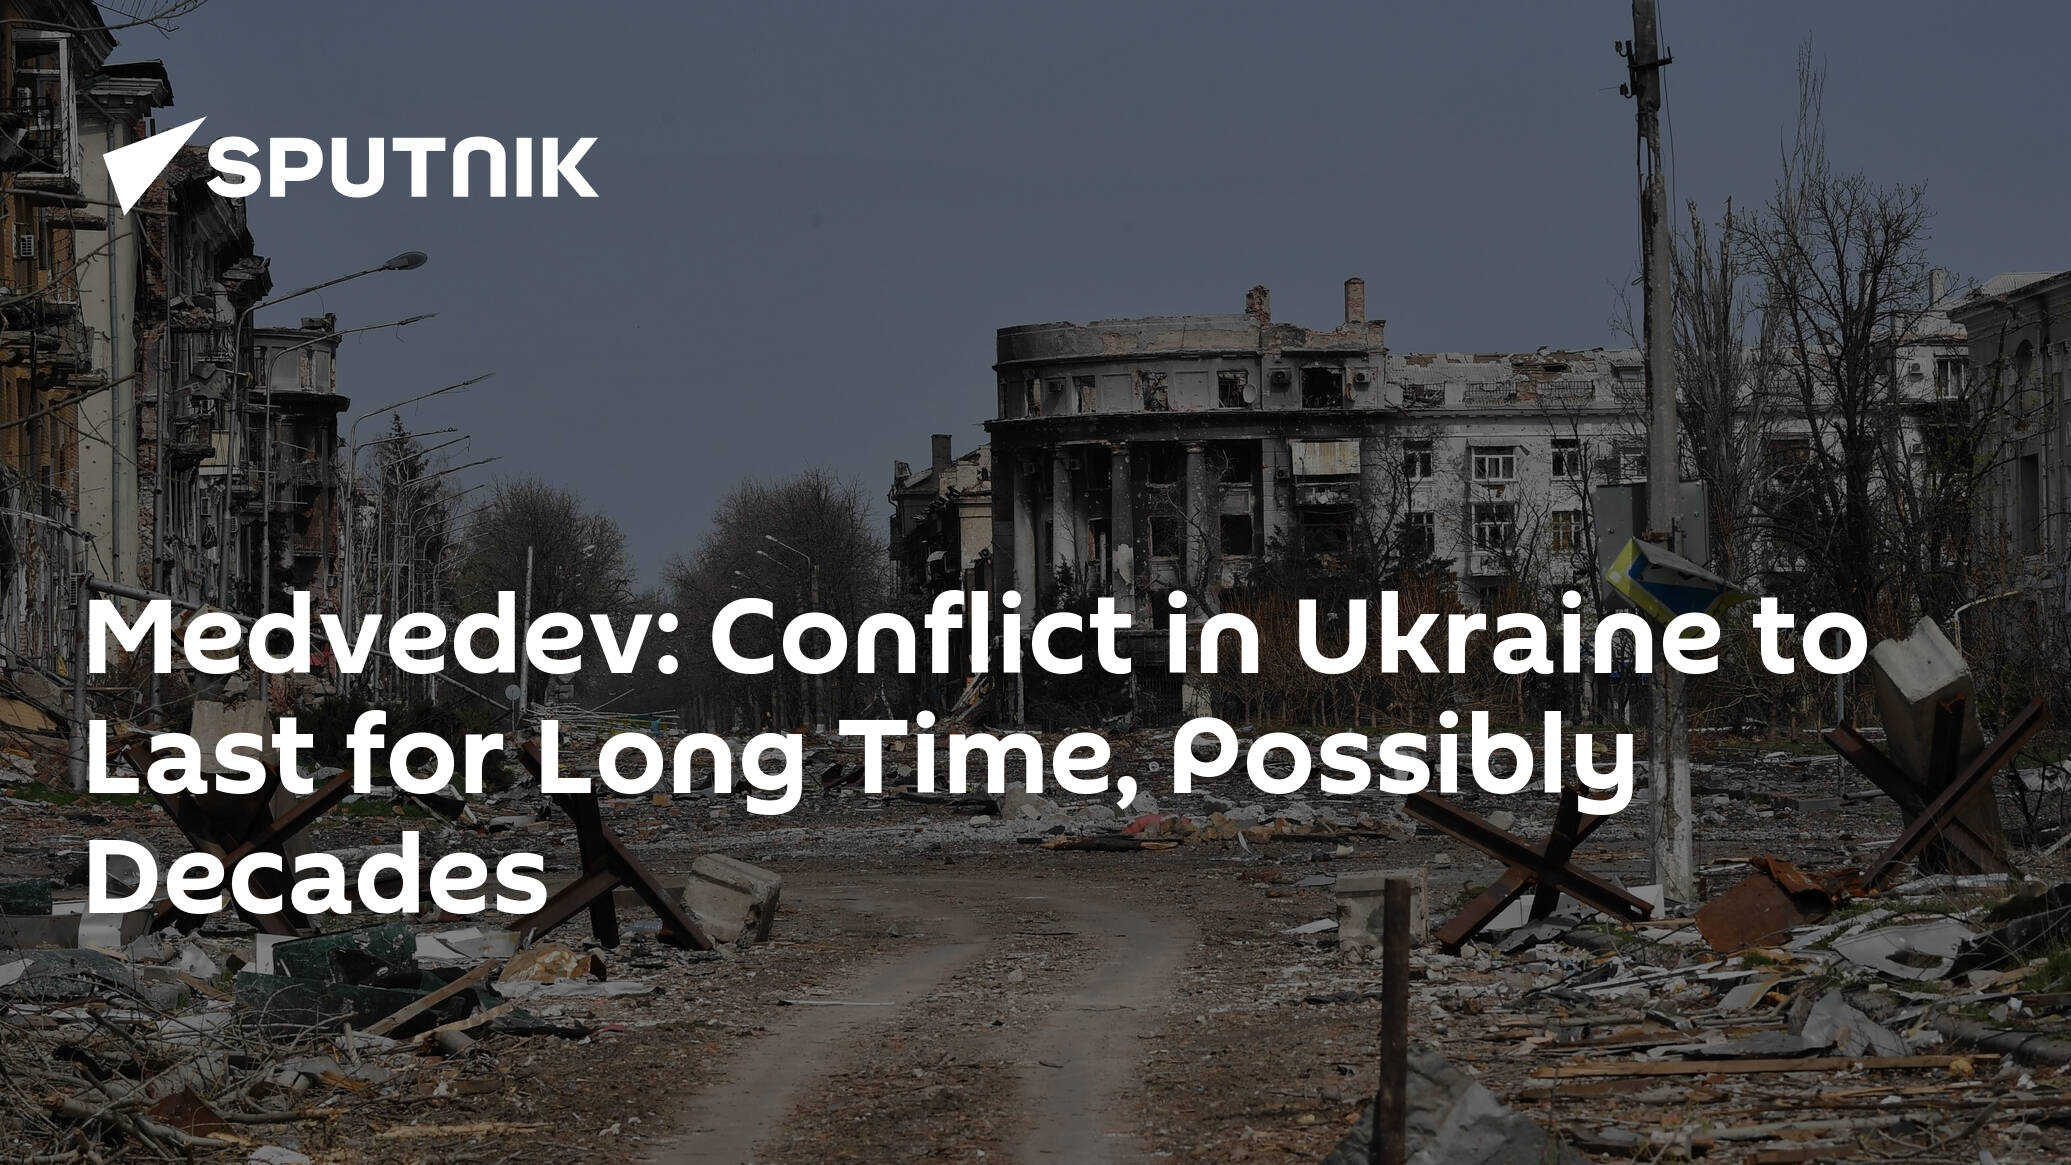 Medvedev: Conflict in Ukraine to Last for Long Time, Possibly Decades